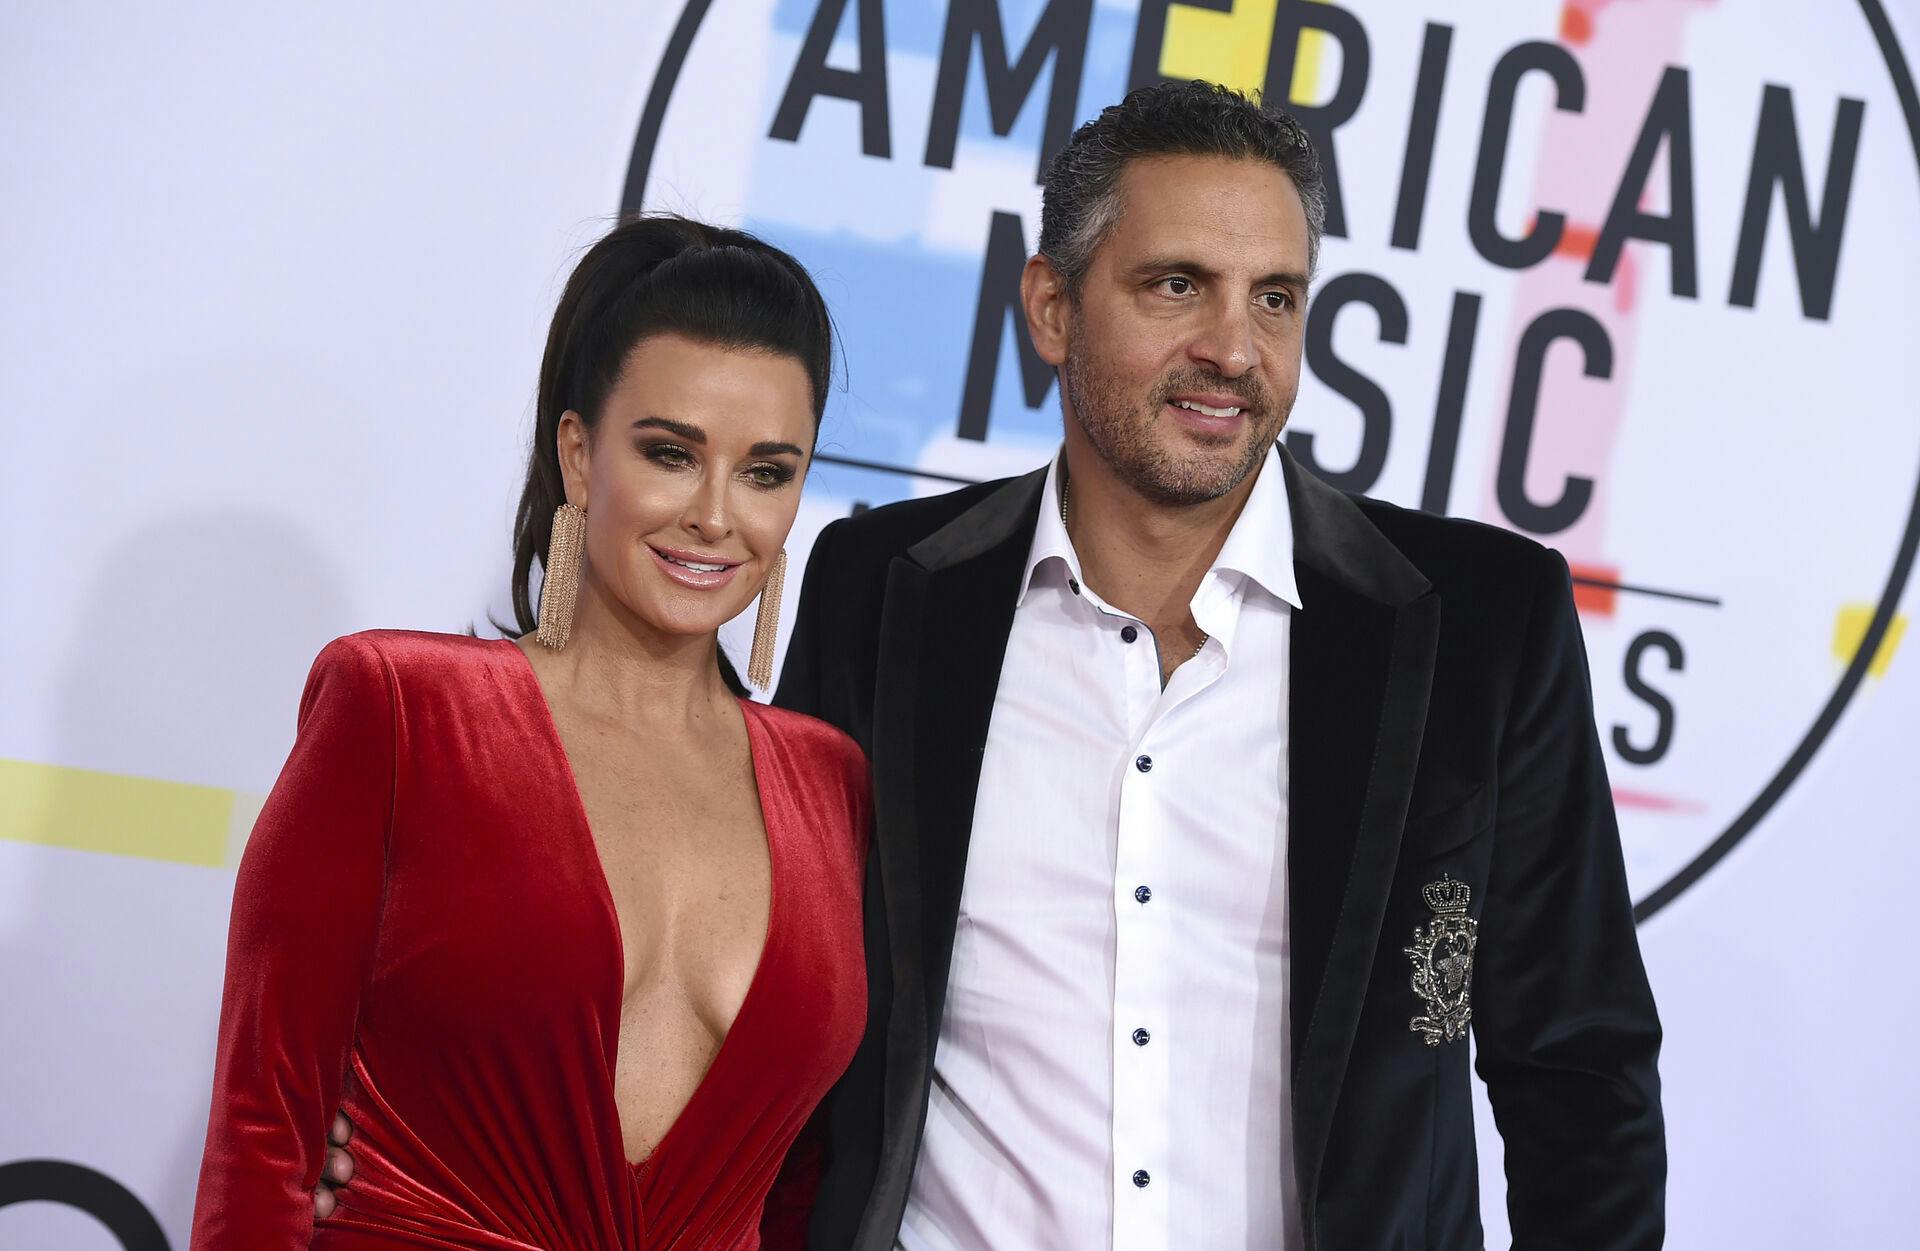 Kyle Richards, left, and Mauricio Umansky arrive at the American Music Awards on Tuesday, Oct. 9, 2018, at the Microsoft Theater in Los Angeles. (Photo by Jordan Strauss/Invision/AP)